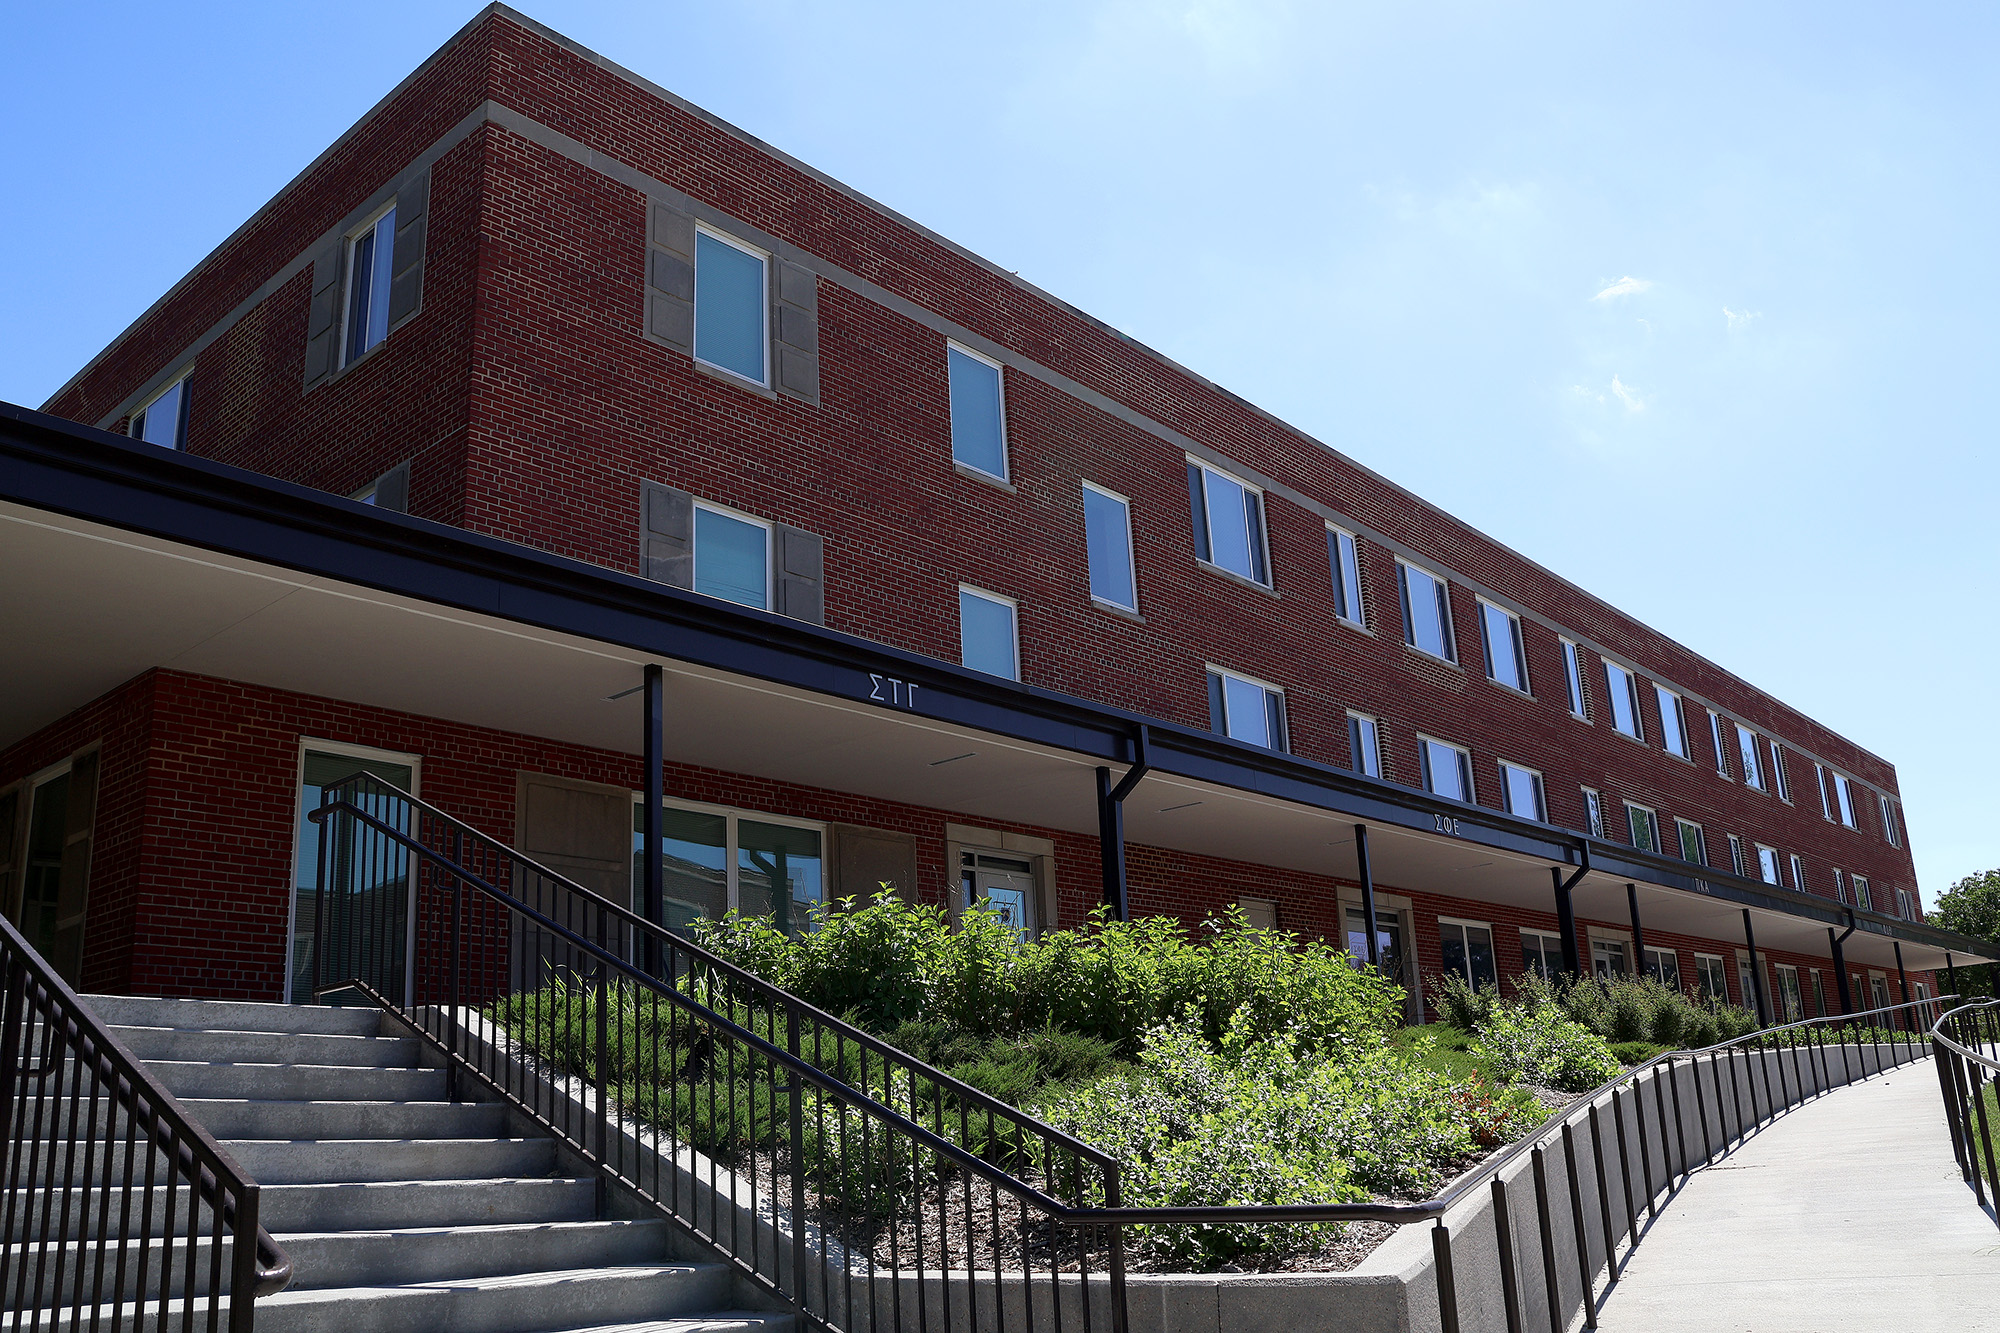 UNK fraternities moved into Martin Hall in January 2023 following a major renovation that transformed the 70-year-old residence hall into a modern living space.